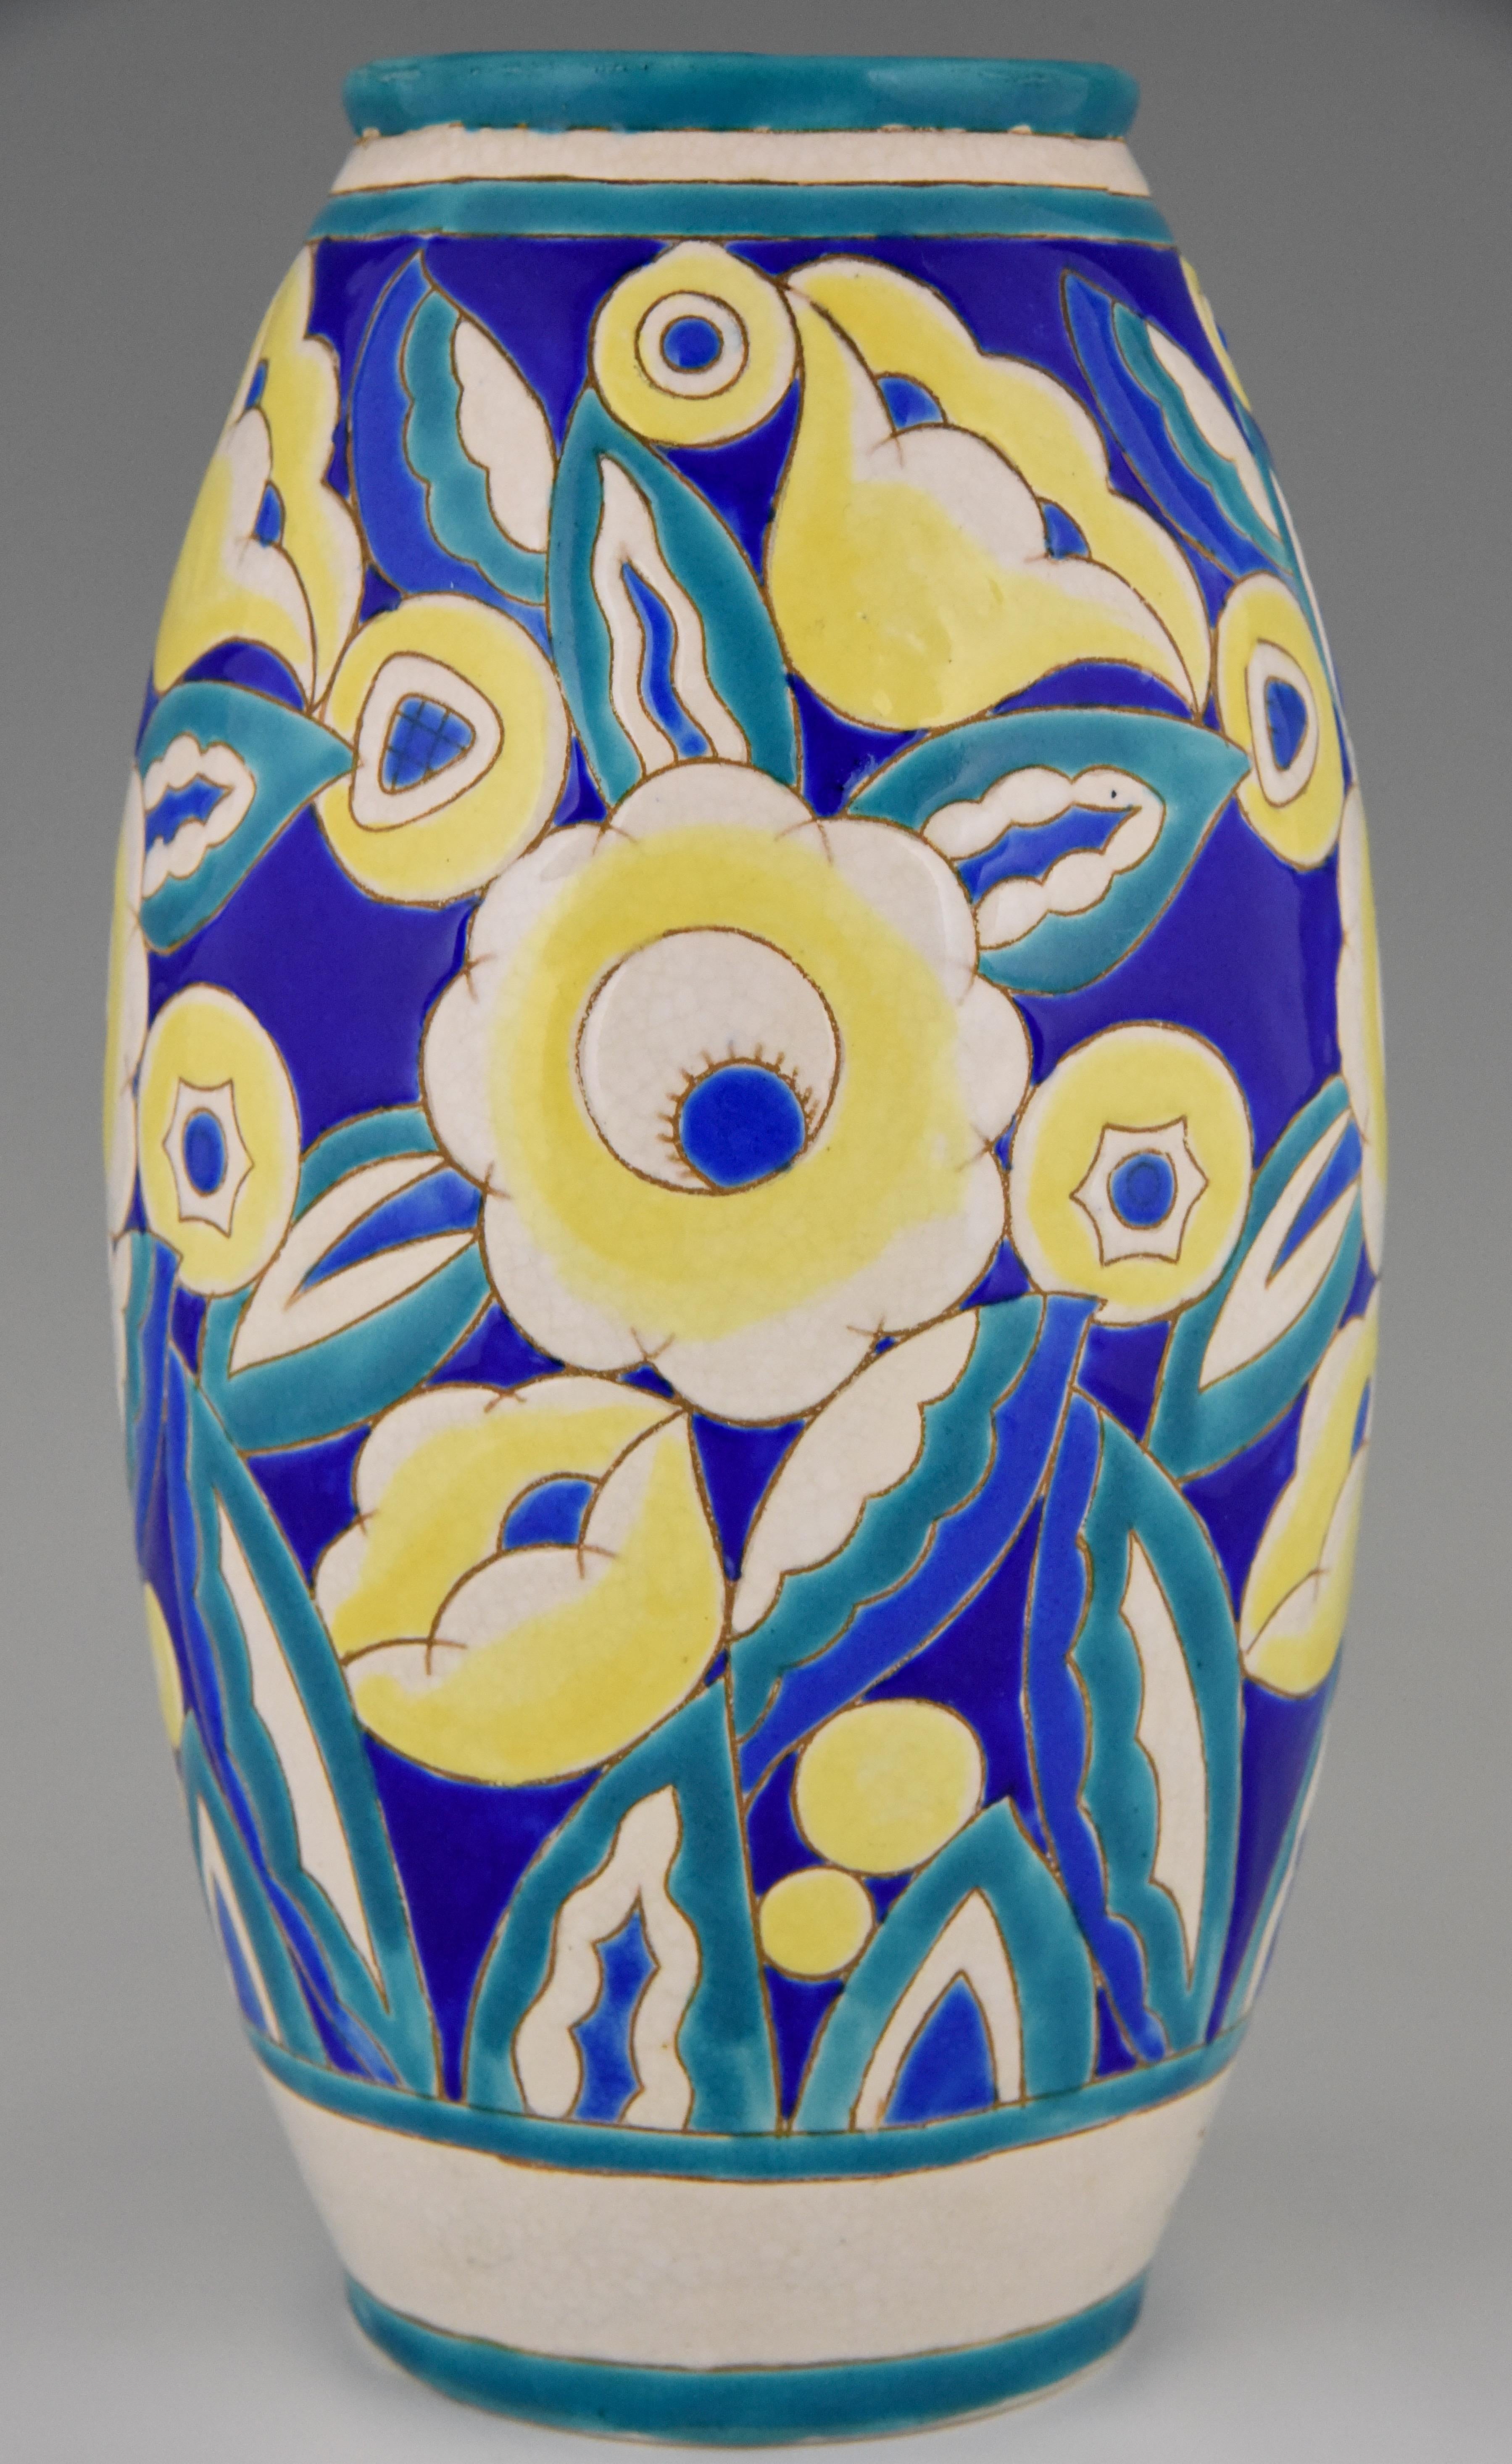 Lovely Art Deco craquelé ceramic vase with flowers by Keramis, signed and numbered, Belgium 1932. Beautiful colors turquoise, blue, white and yellow. 
This decor is illustrated in the book: “Art Deco ceramics Charles Catteau” by Marc Pairon.